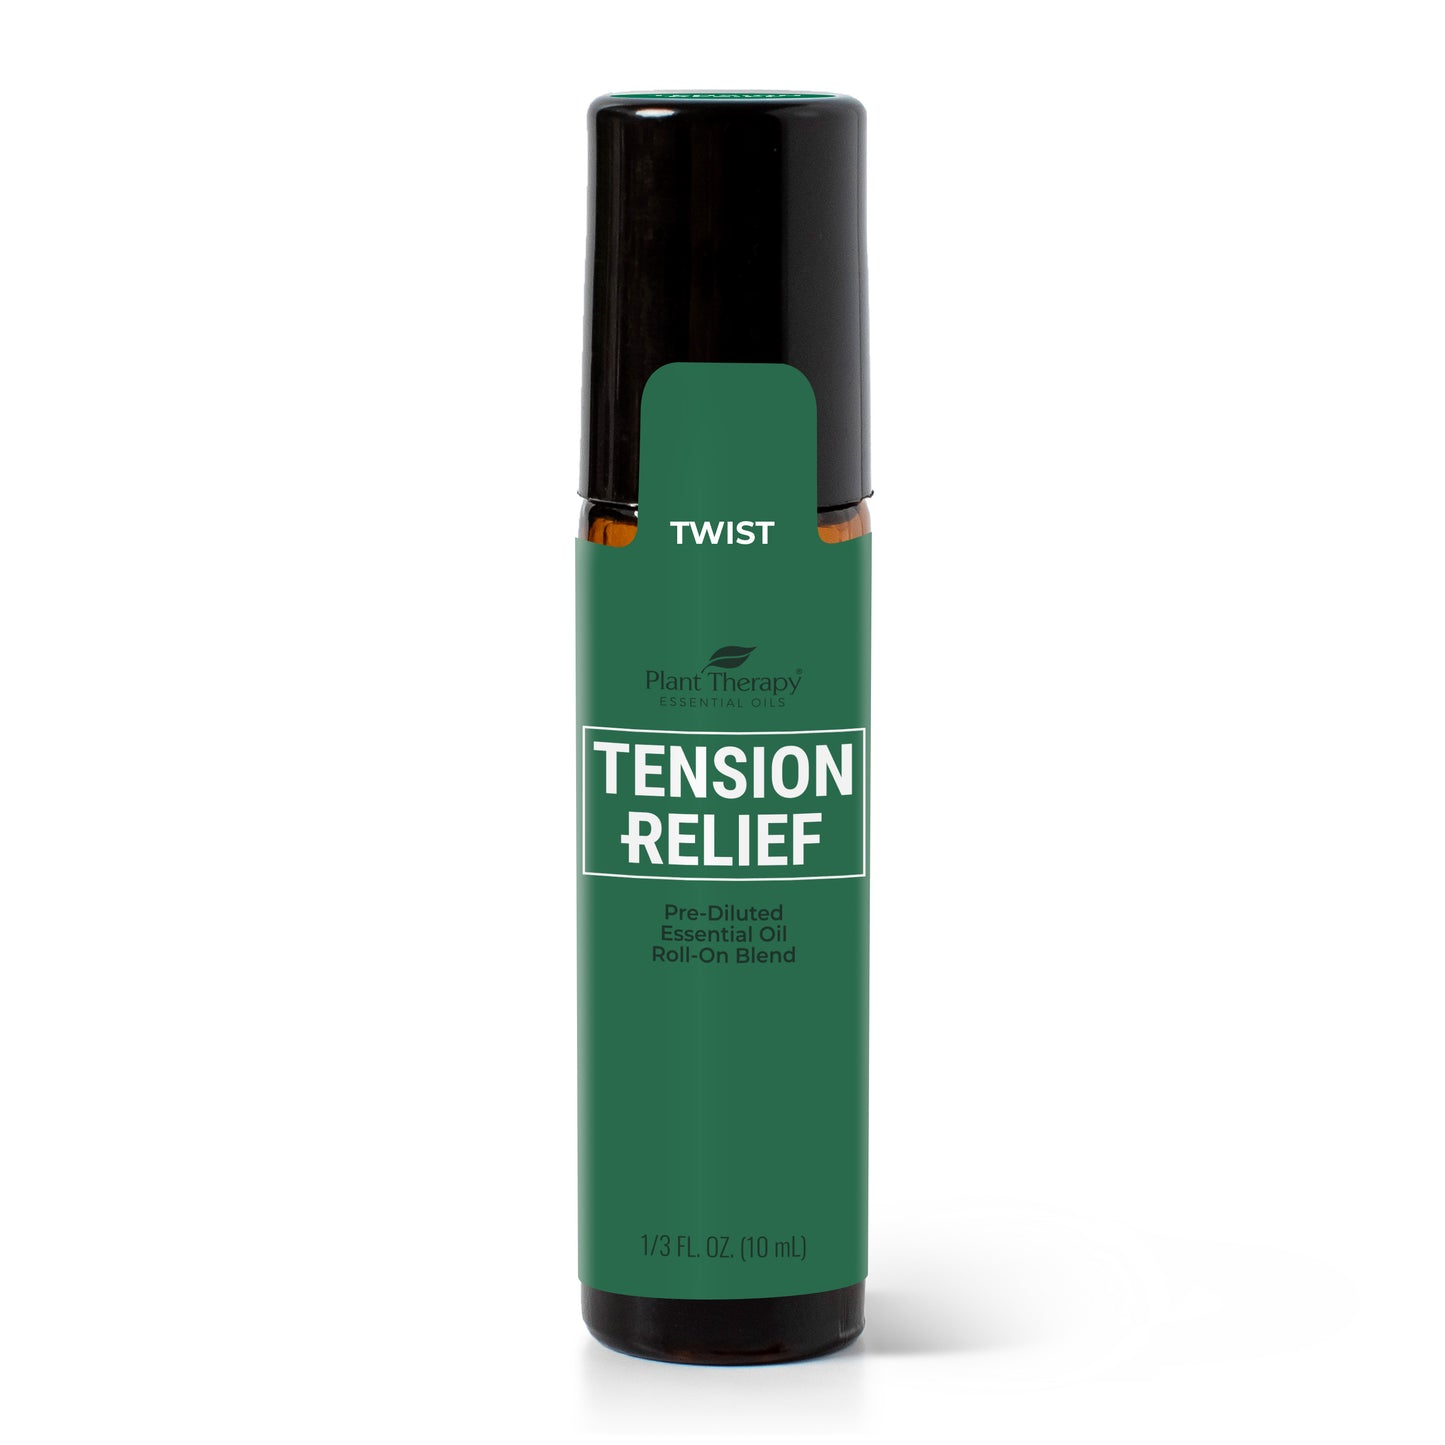 Tension Relief Essential Oil Blend Pre-Diluted Roll-On Success